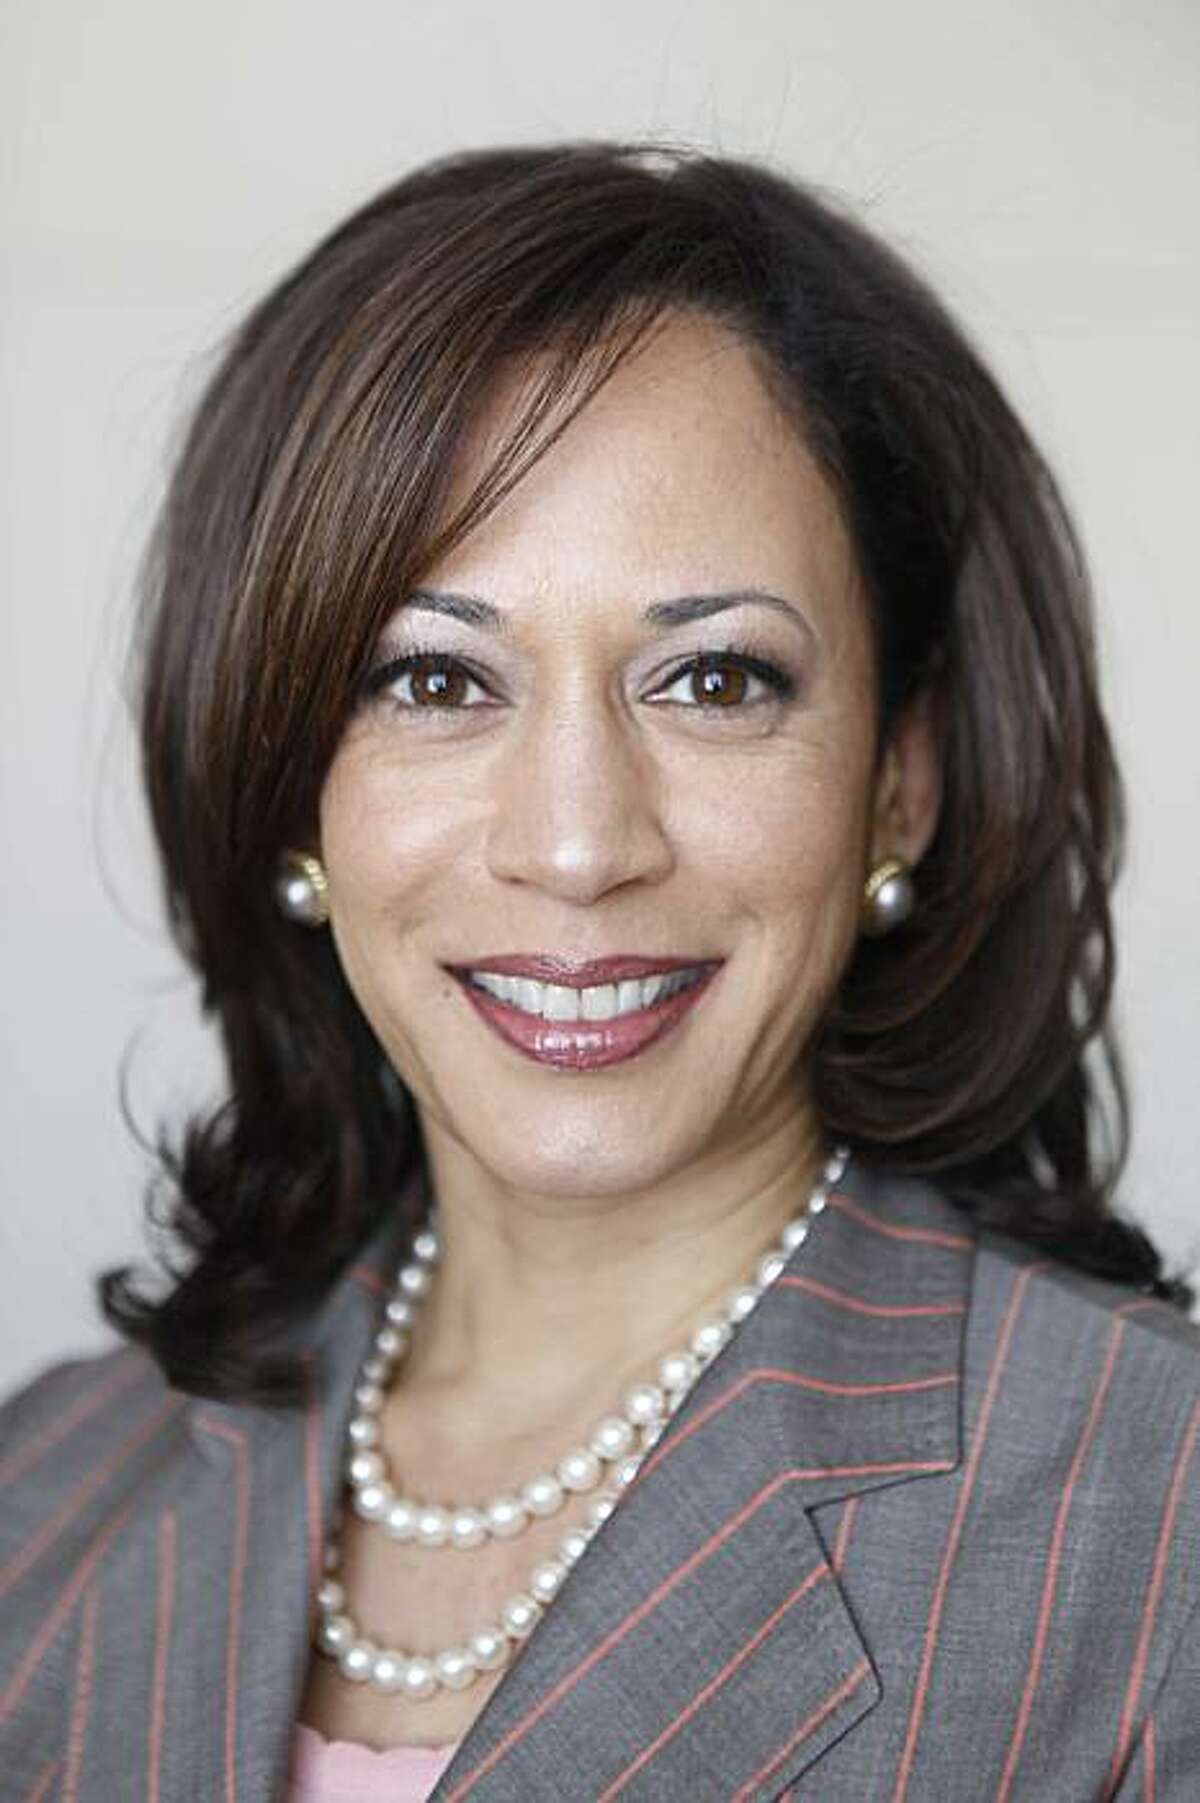 Kamala Harris, District Attorney for San Francisco, stands for a portrait in her Hall of Justice office on Tuesday April 28, 2009 in San Francisco, Calif.